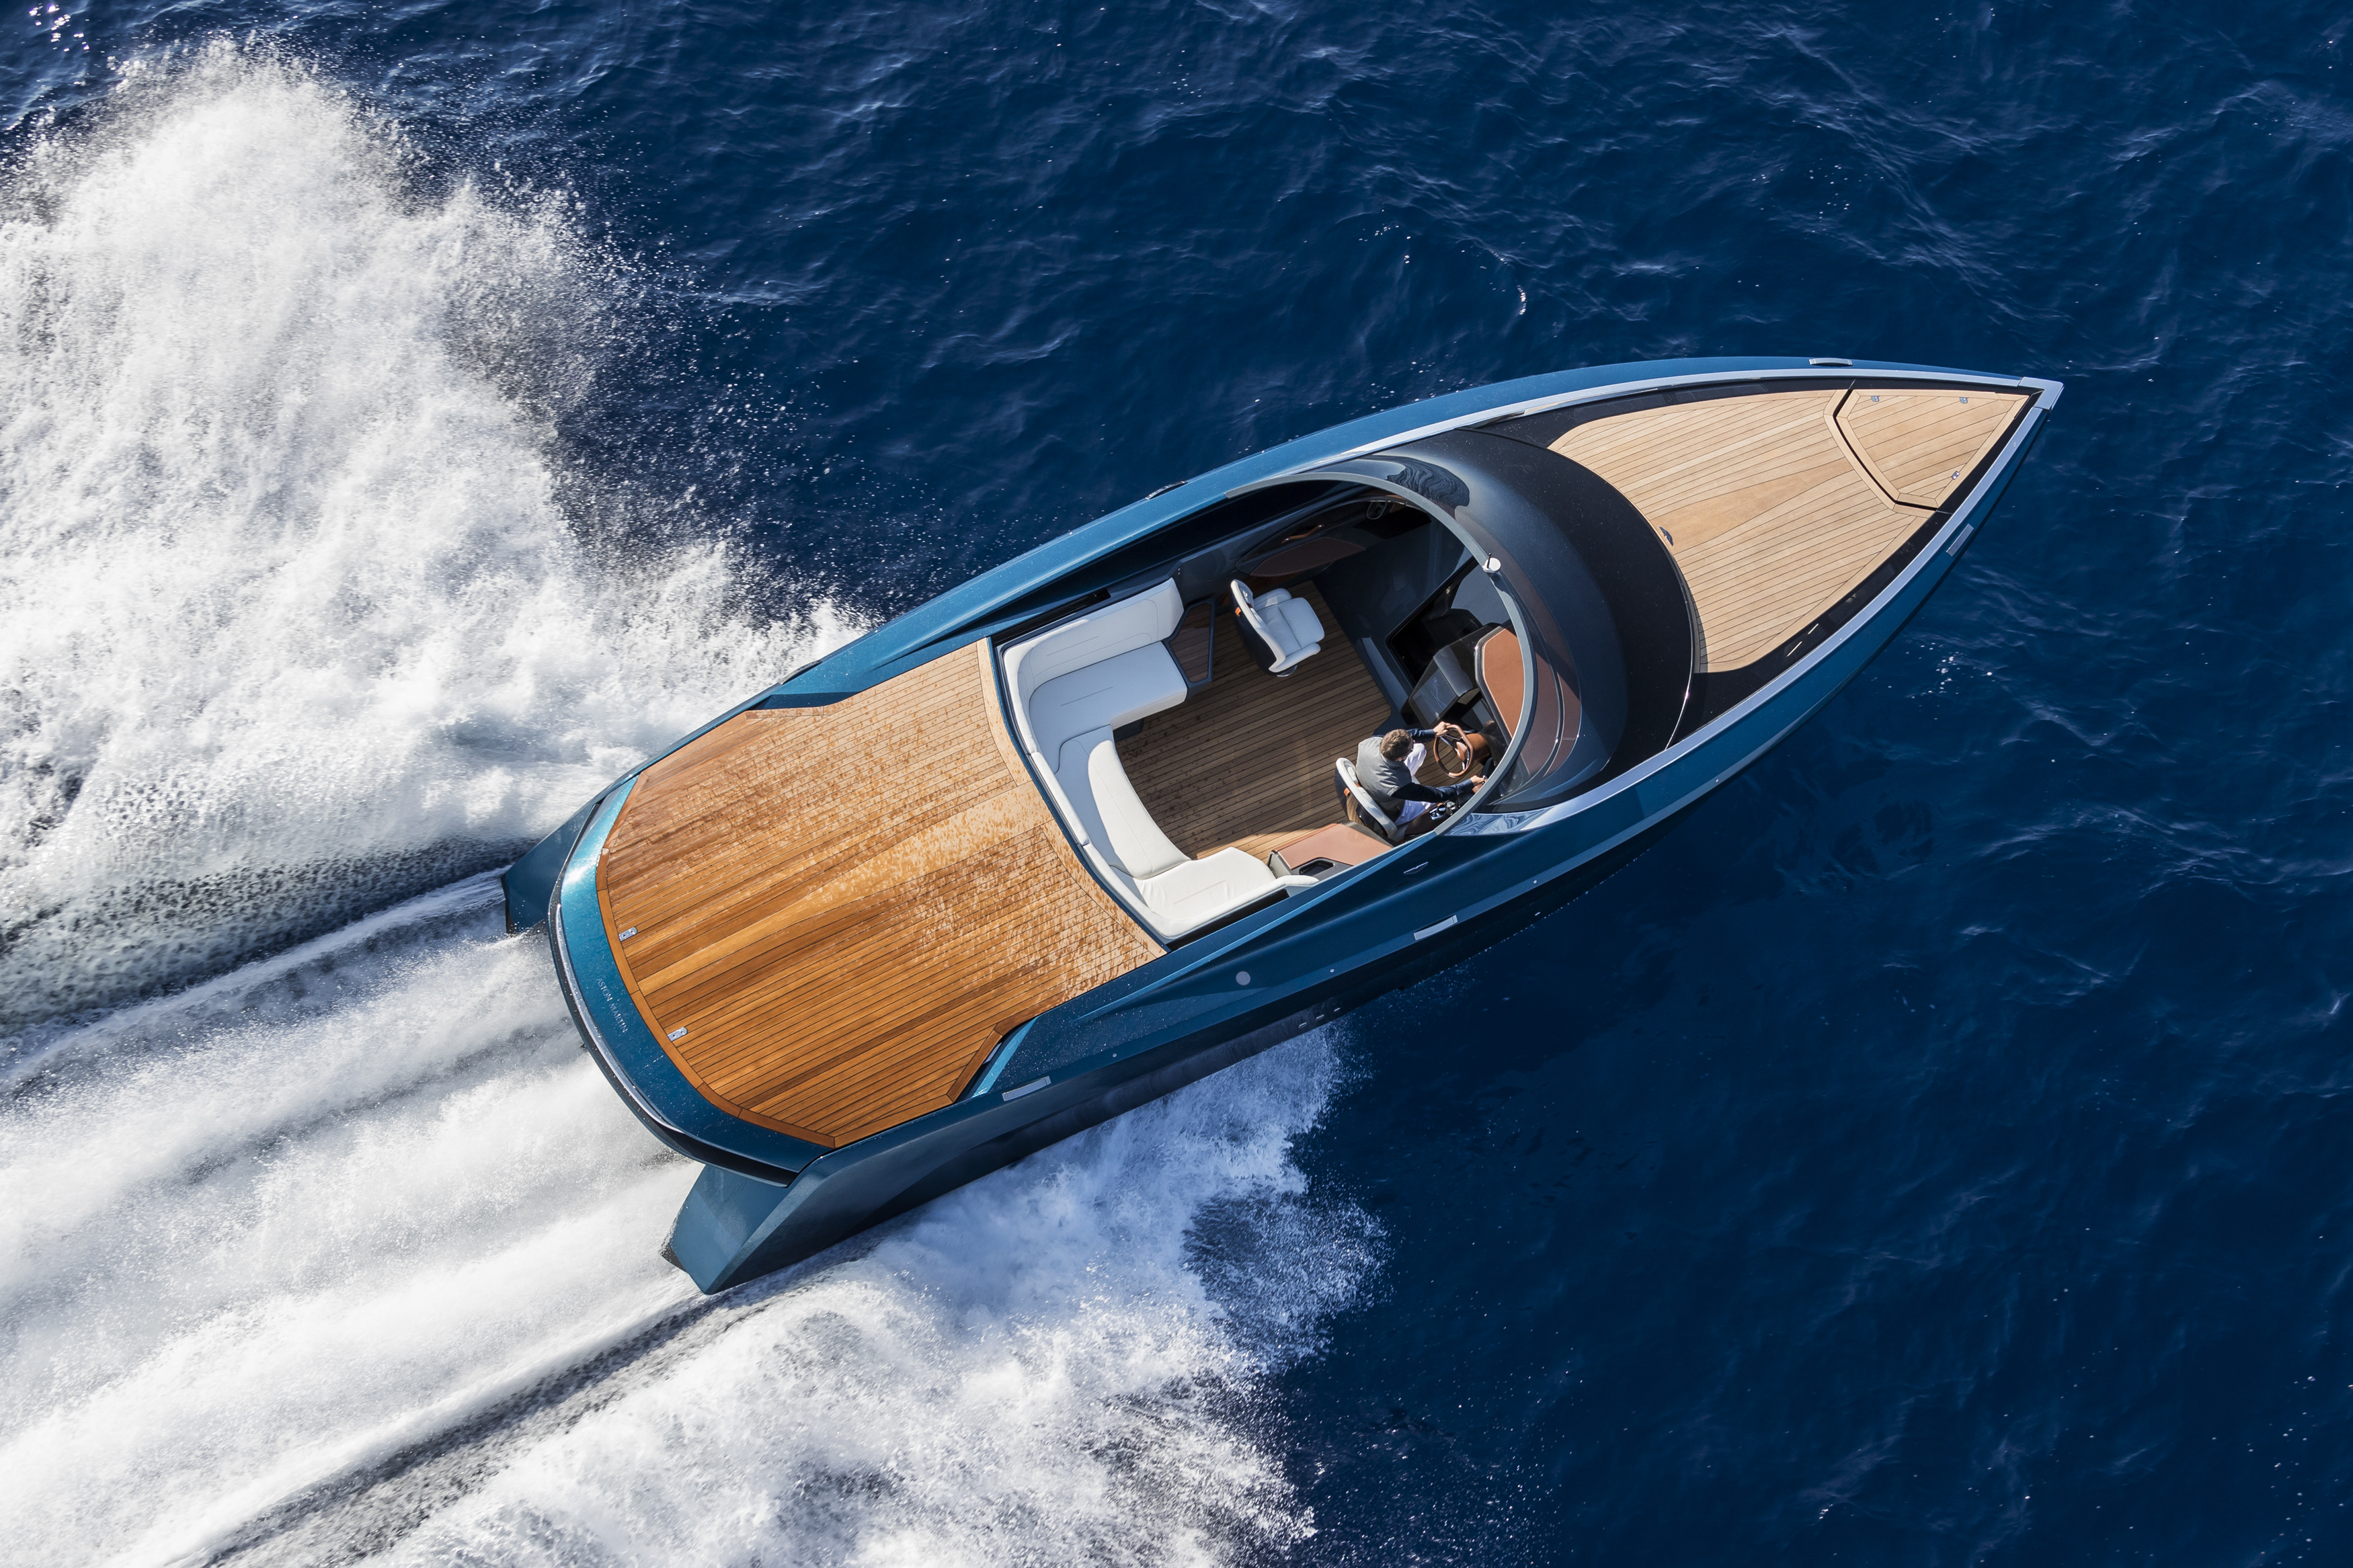 The prototype Aston Martin AM37 powerboat, taken from the air